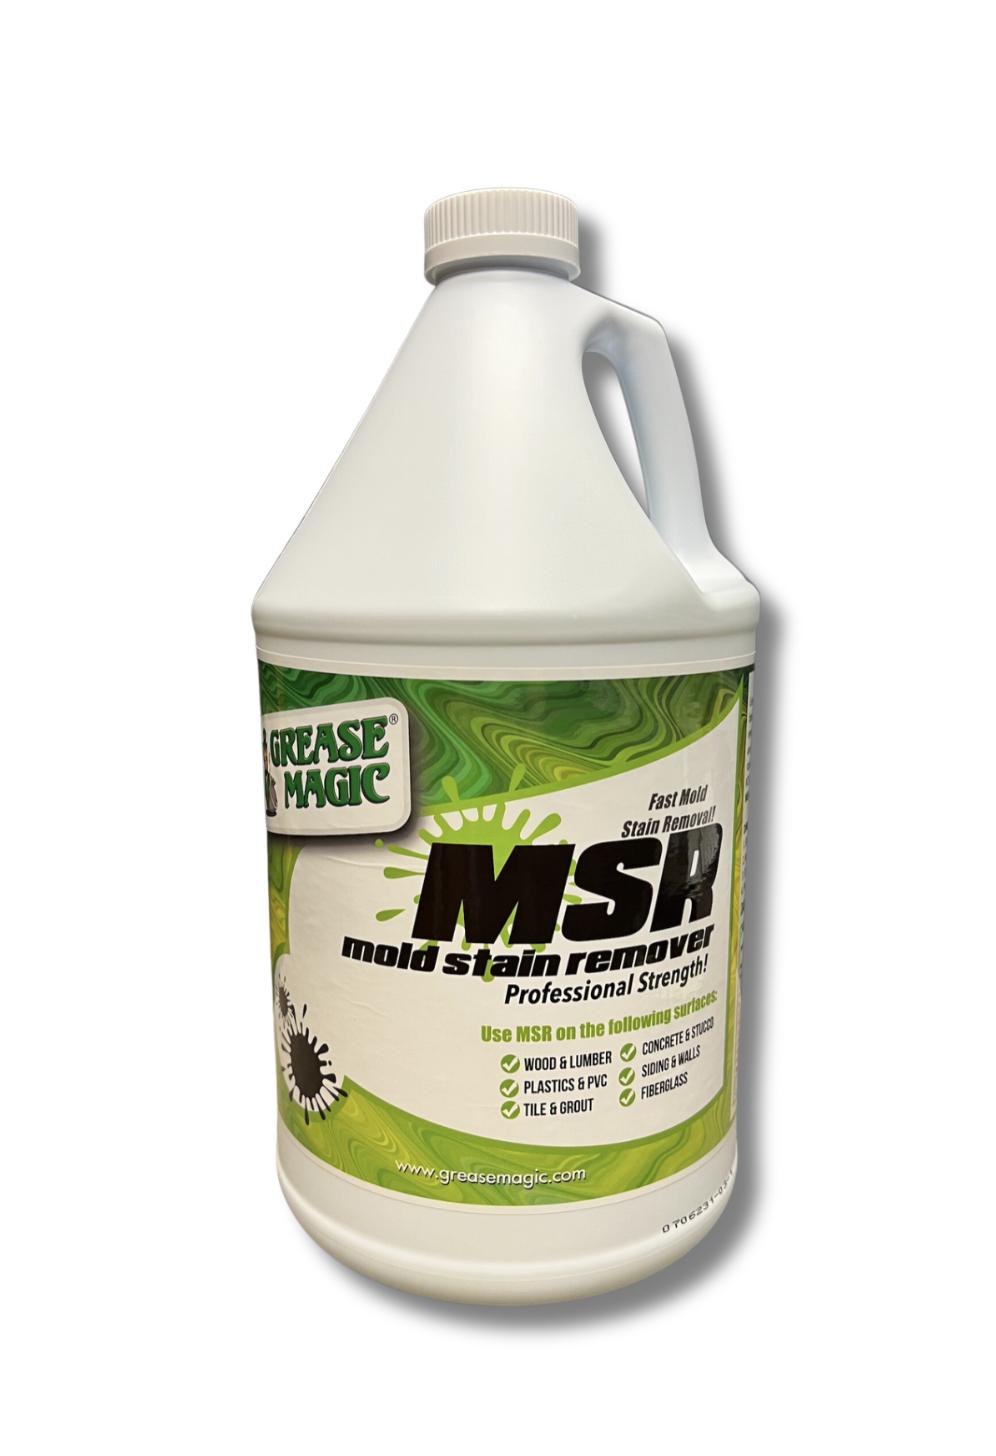 Grease Magic MSR Mold Stain Remover Gal. - NuTech Cleaning Systems